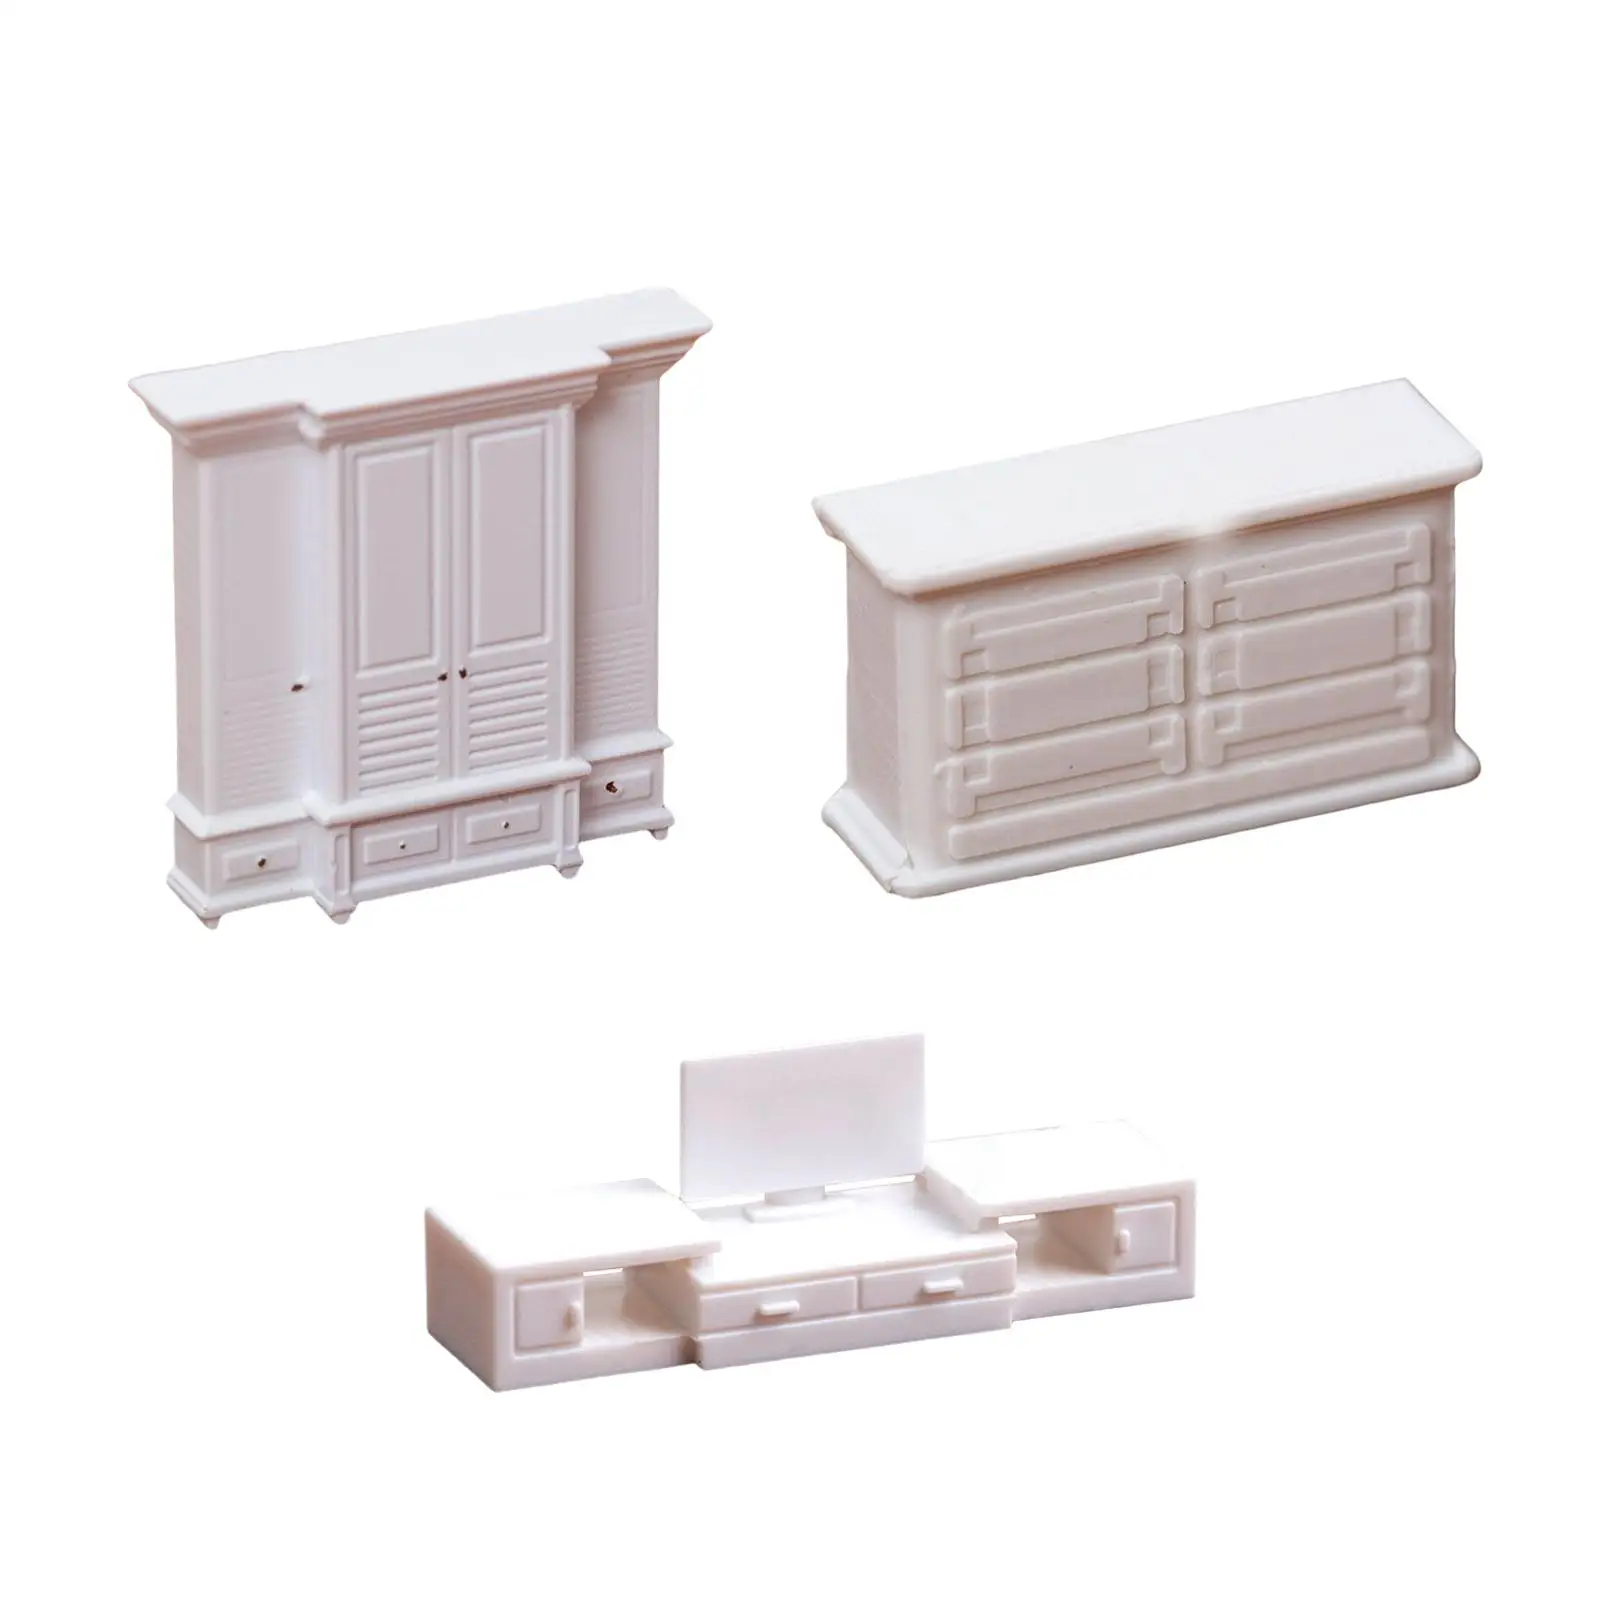 Miniature Furniture Model Realistic Dollhouse Furniture for DIY Projects Decor Diorama Layout Photo Props Sand Table Decoration